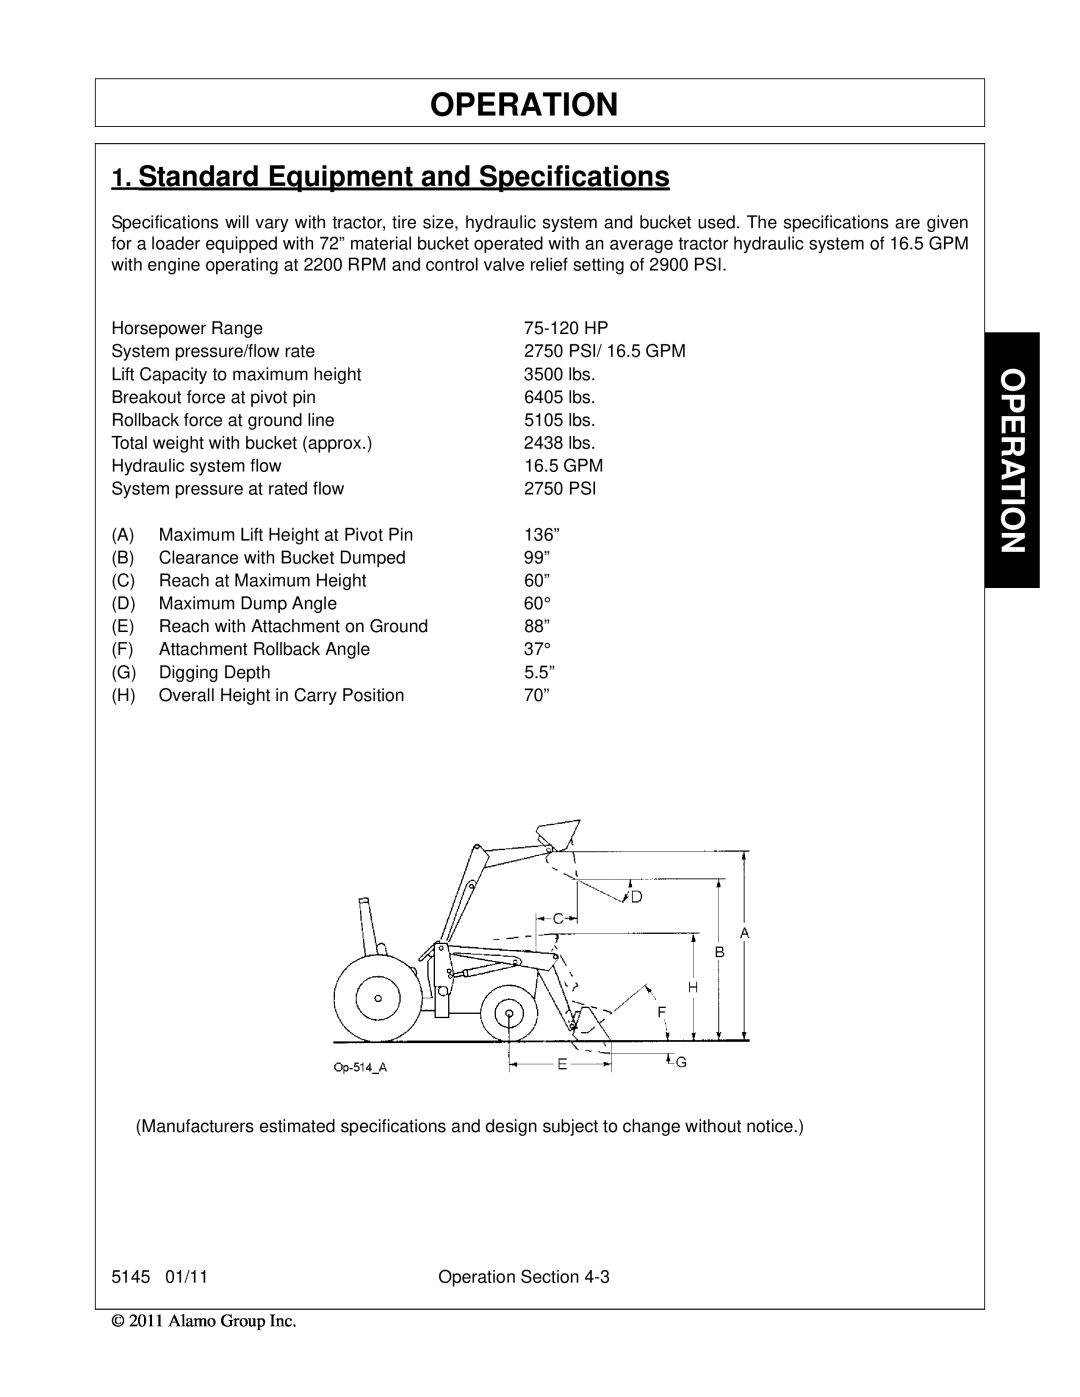 Bush Hog 5145 manual Operation, Standard Equipment and Specifications 